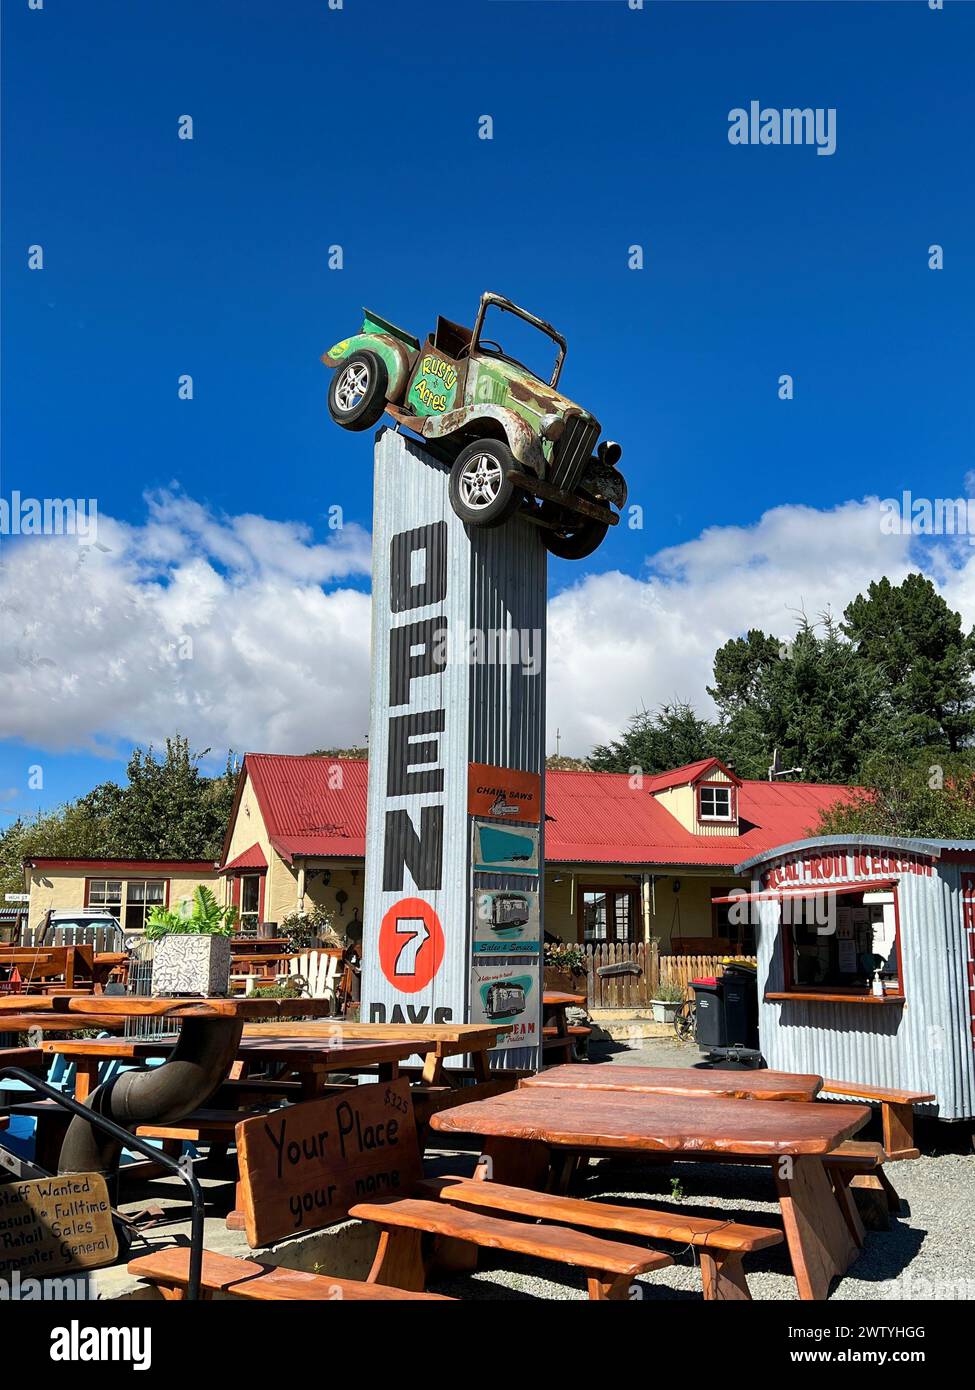 Vintage old car on top of a junk yard sign indicating it is open for business Stock Photo